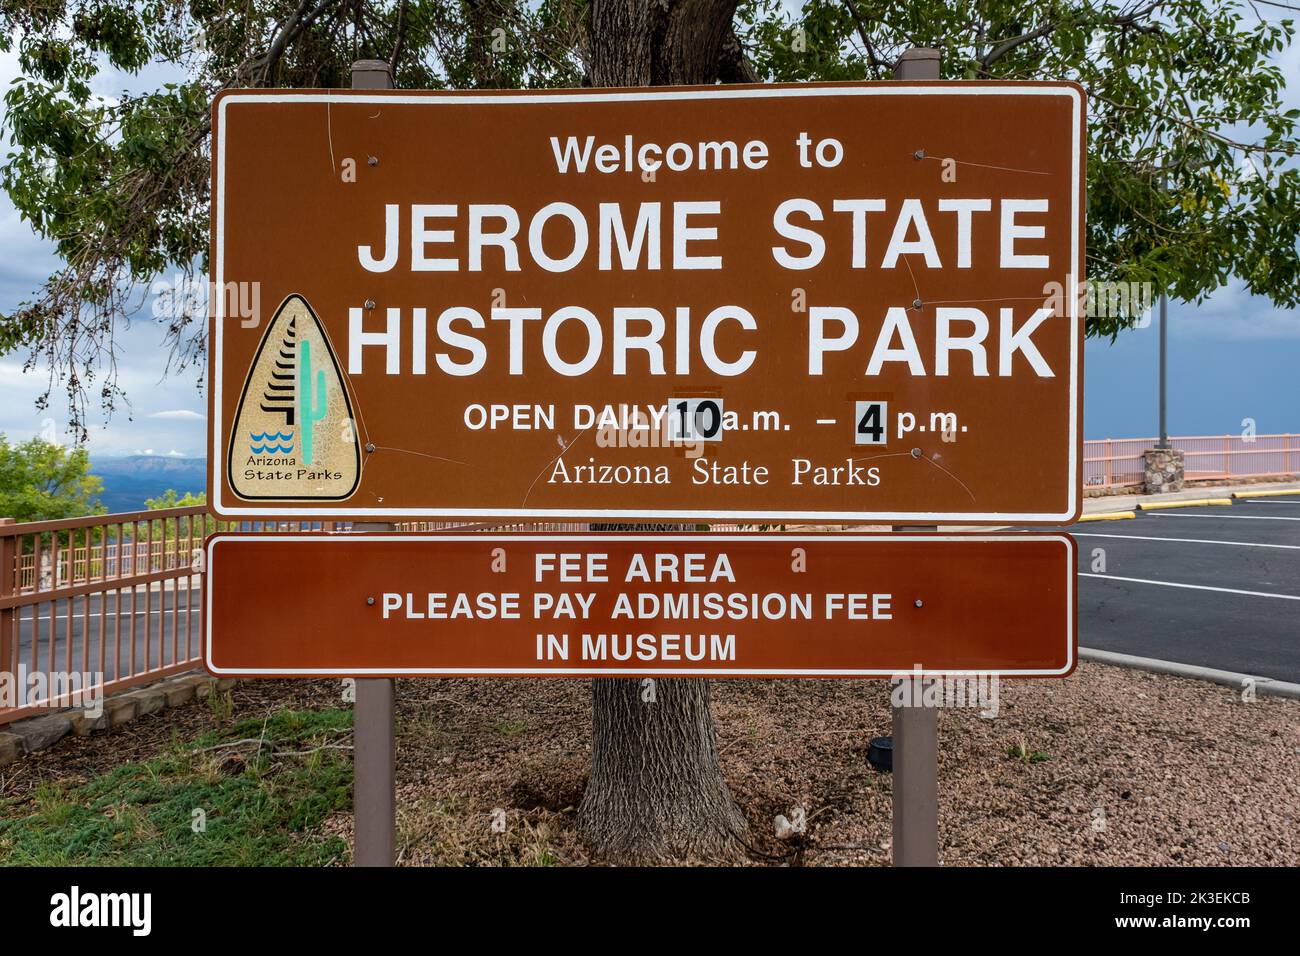 Sign for Jerome State Historic Park, an Arizona State Park, information on hours and fees. Stock Photo